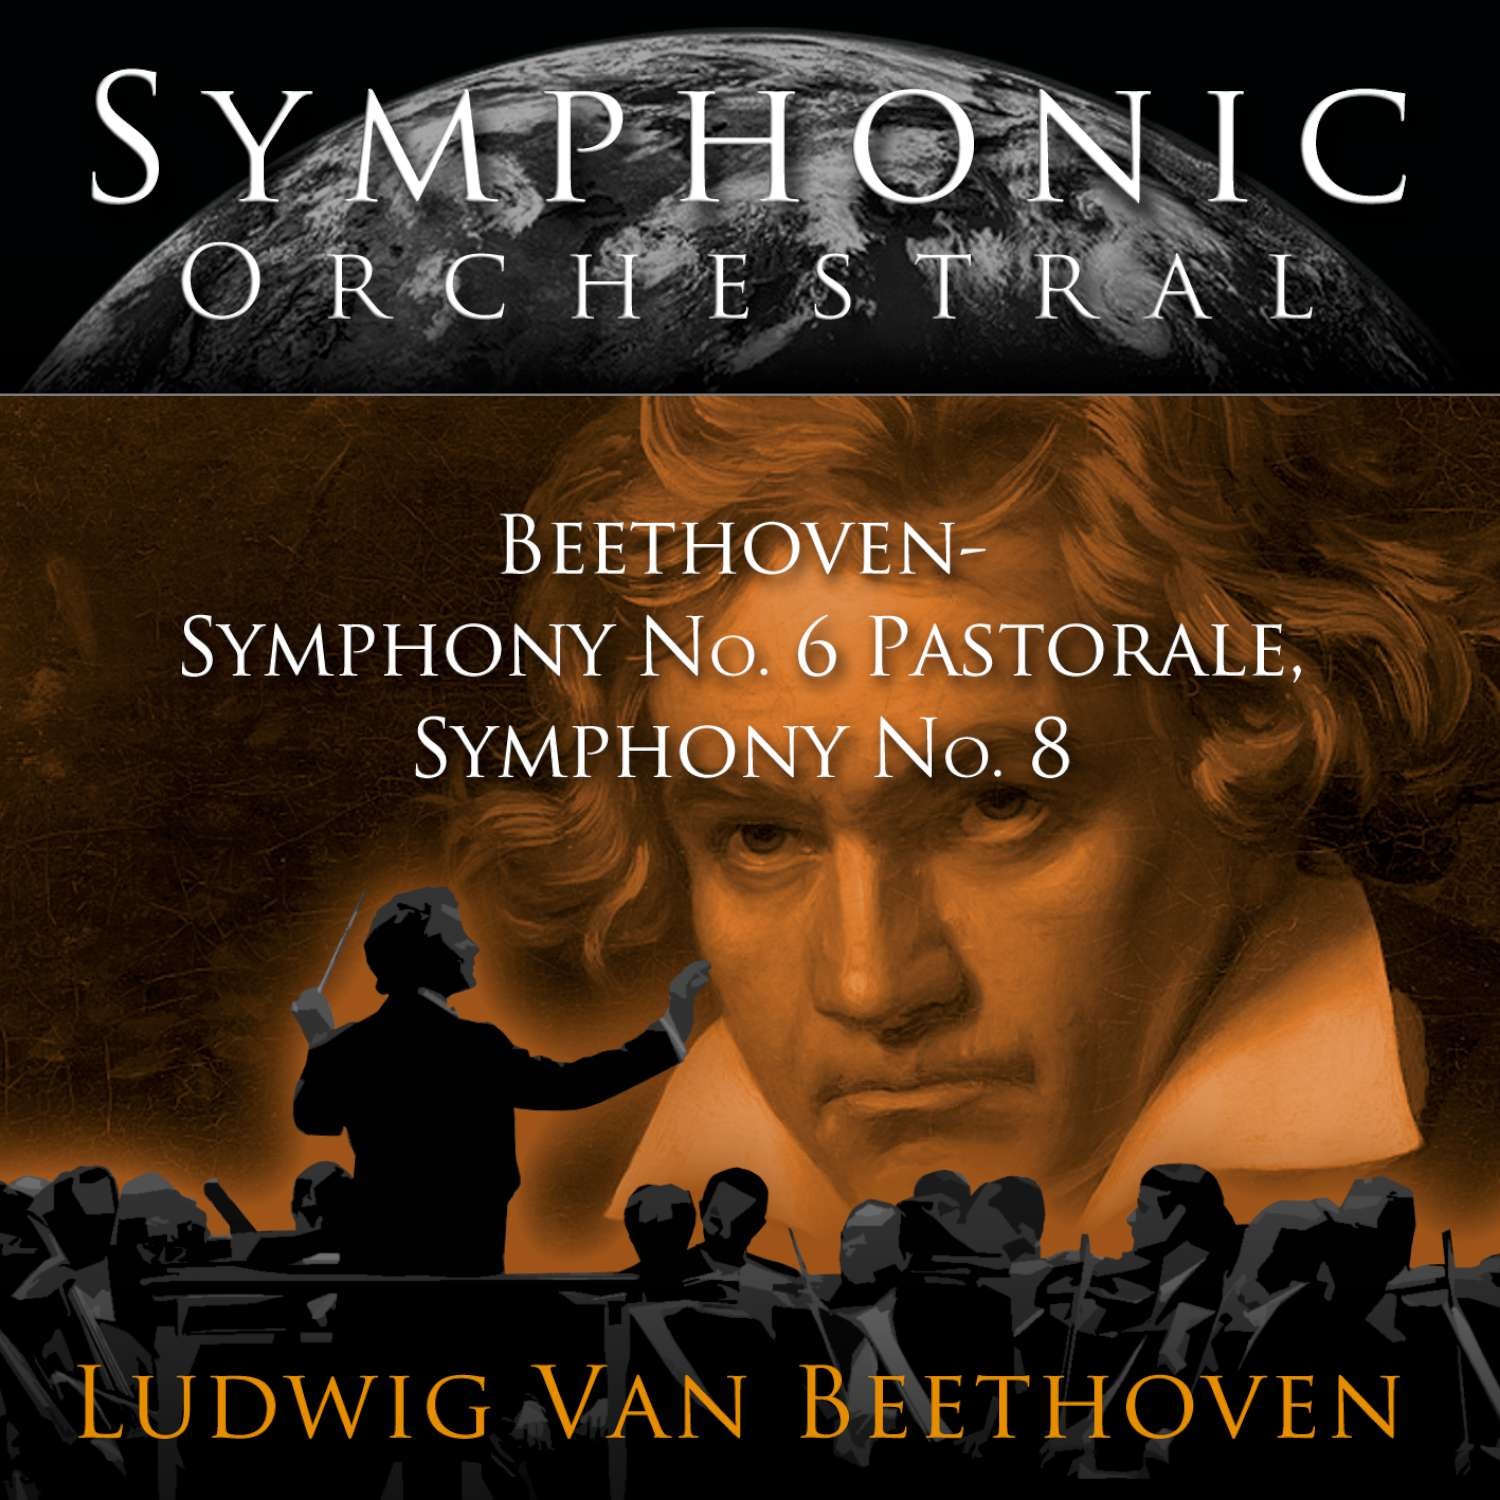 Beethoven: Symphony #6 in F, Op. 68, "Pastoral" - 5. Allegretto